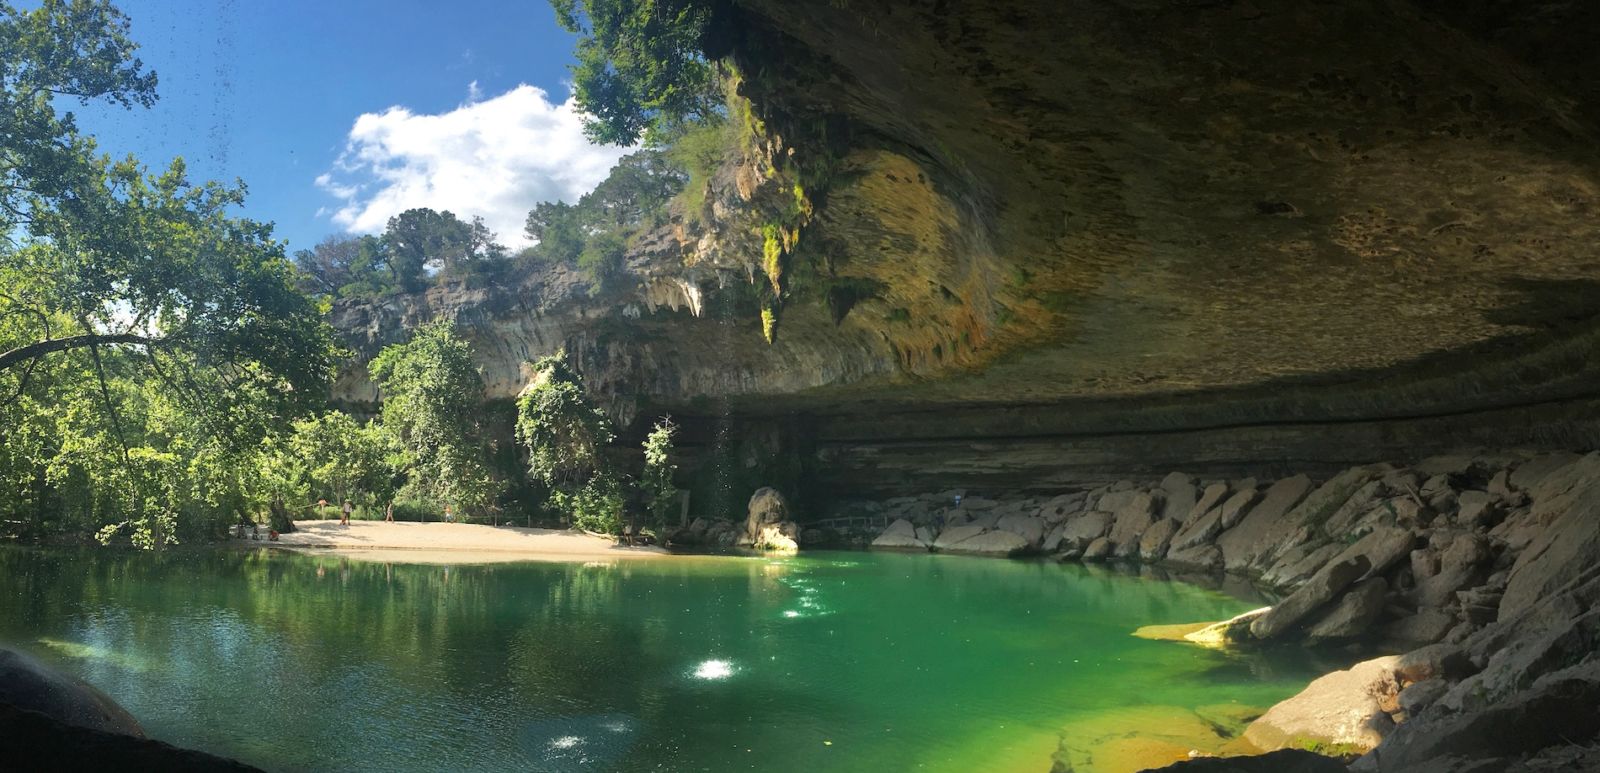 A Guide to Texas Swimming Holes